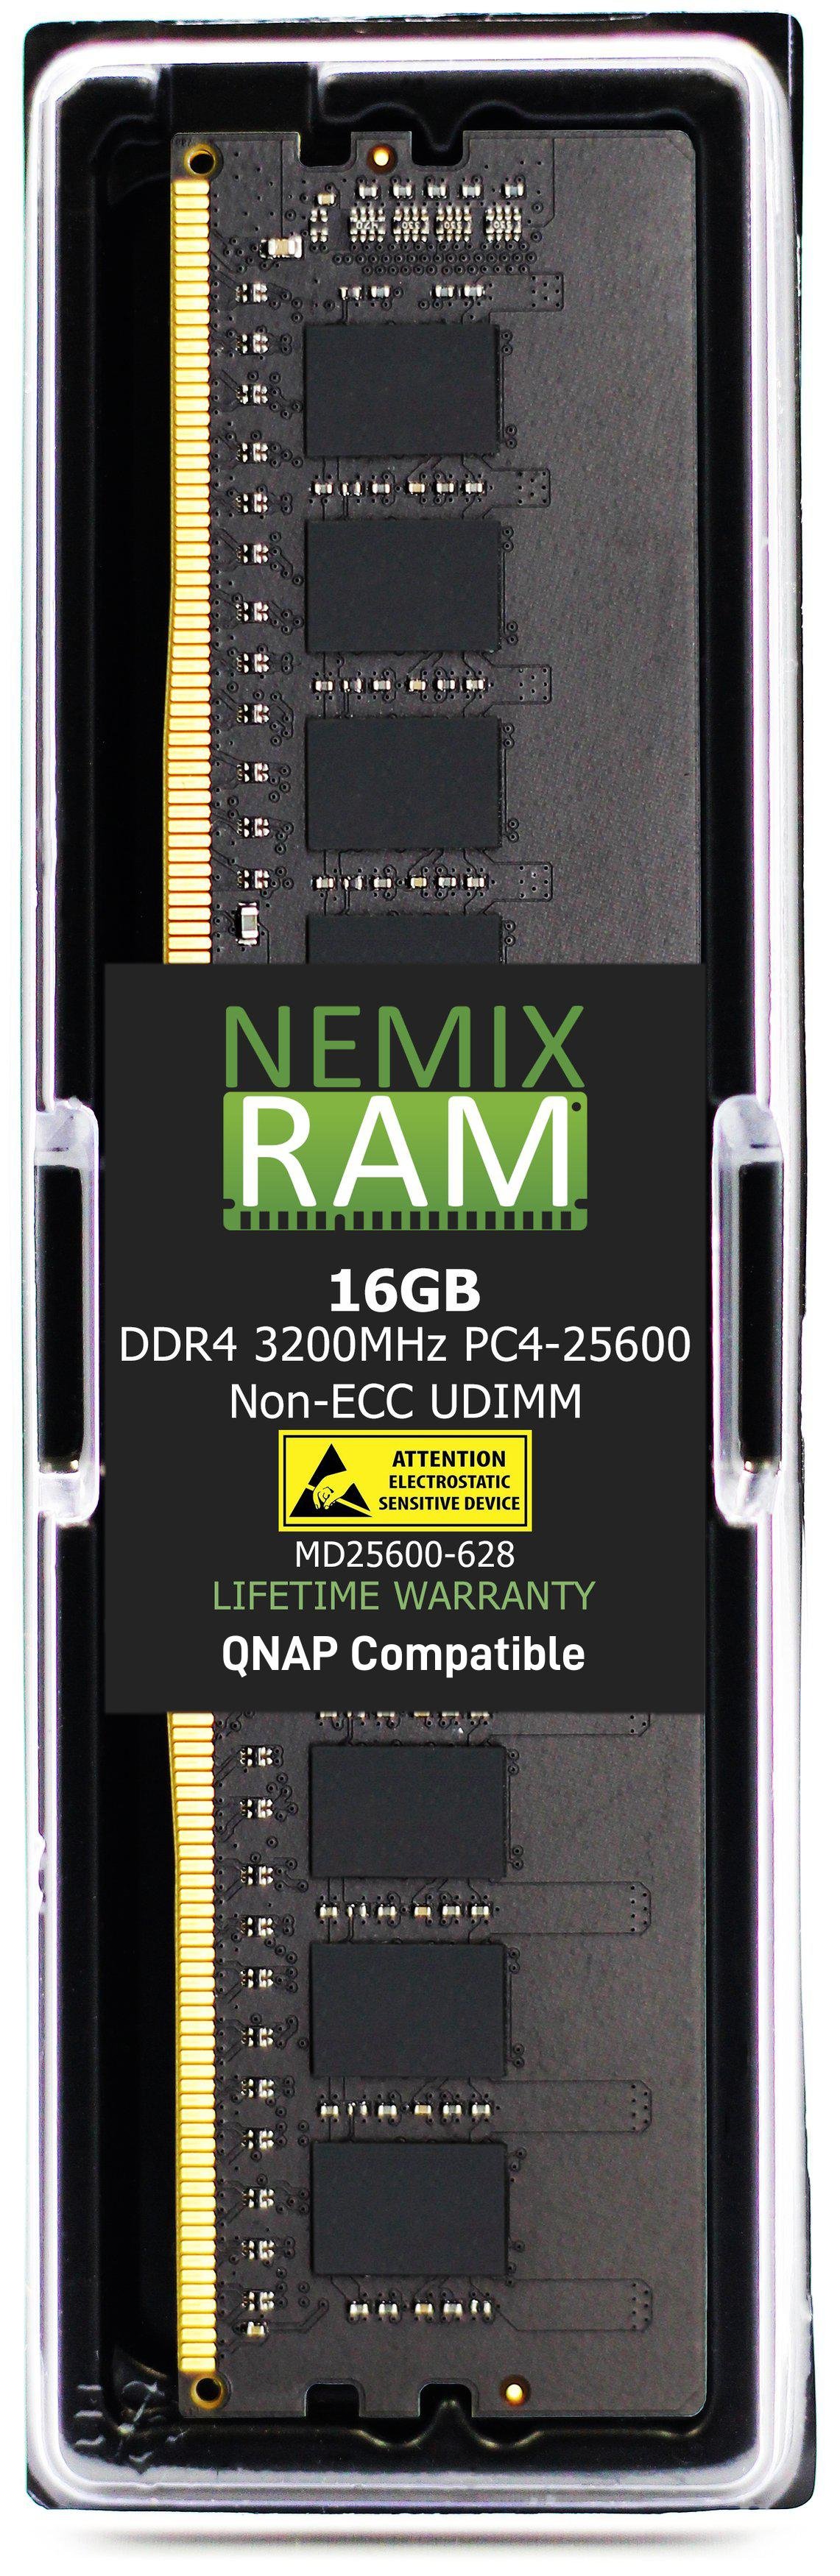 QNAP RAM-16GDR4T0-UD-3200 16GB DDR4 3200MHz PC4-25600 UDIMM 2Rx8 Compatible Memory